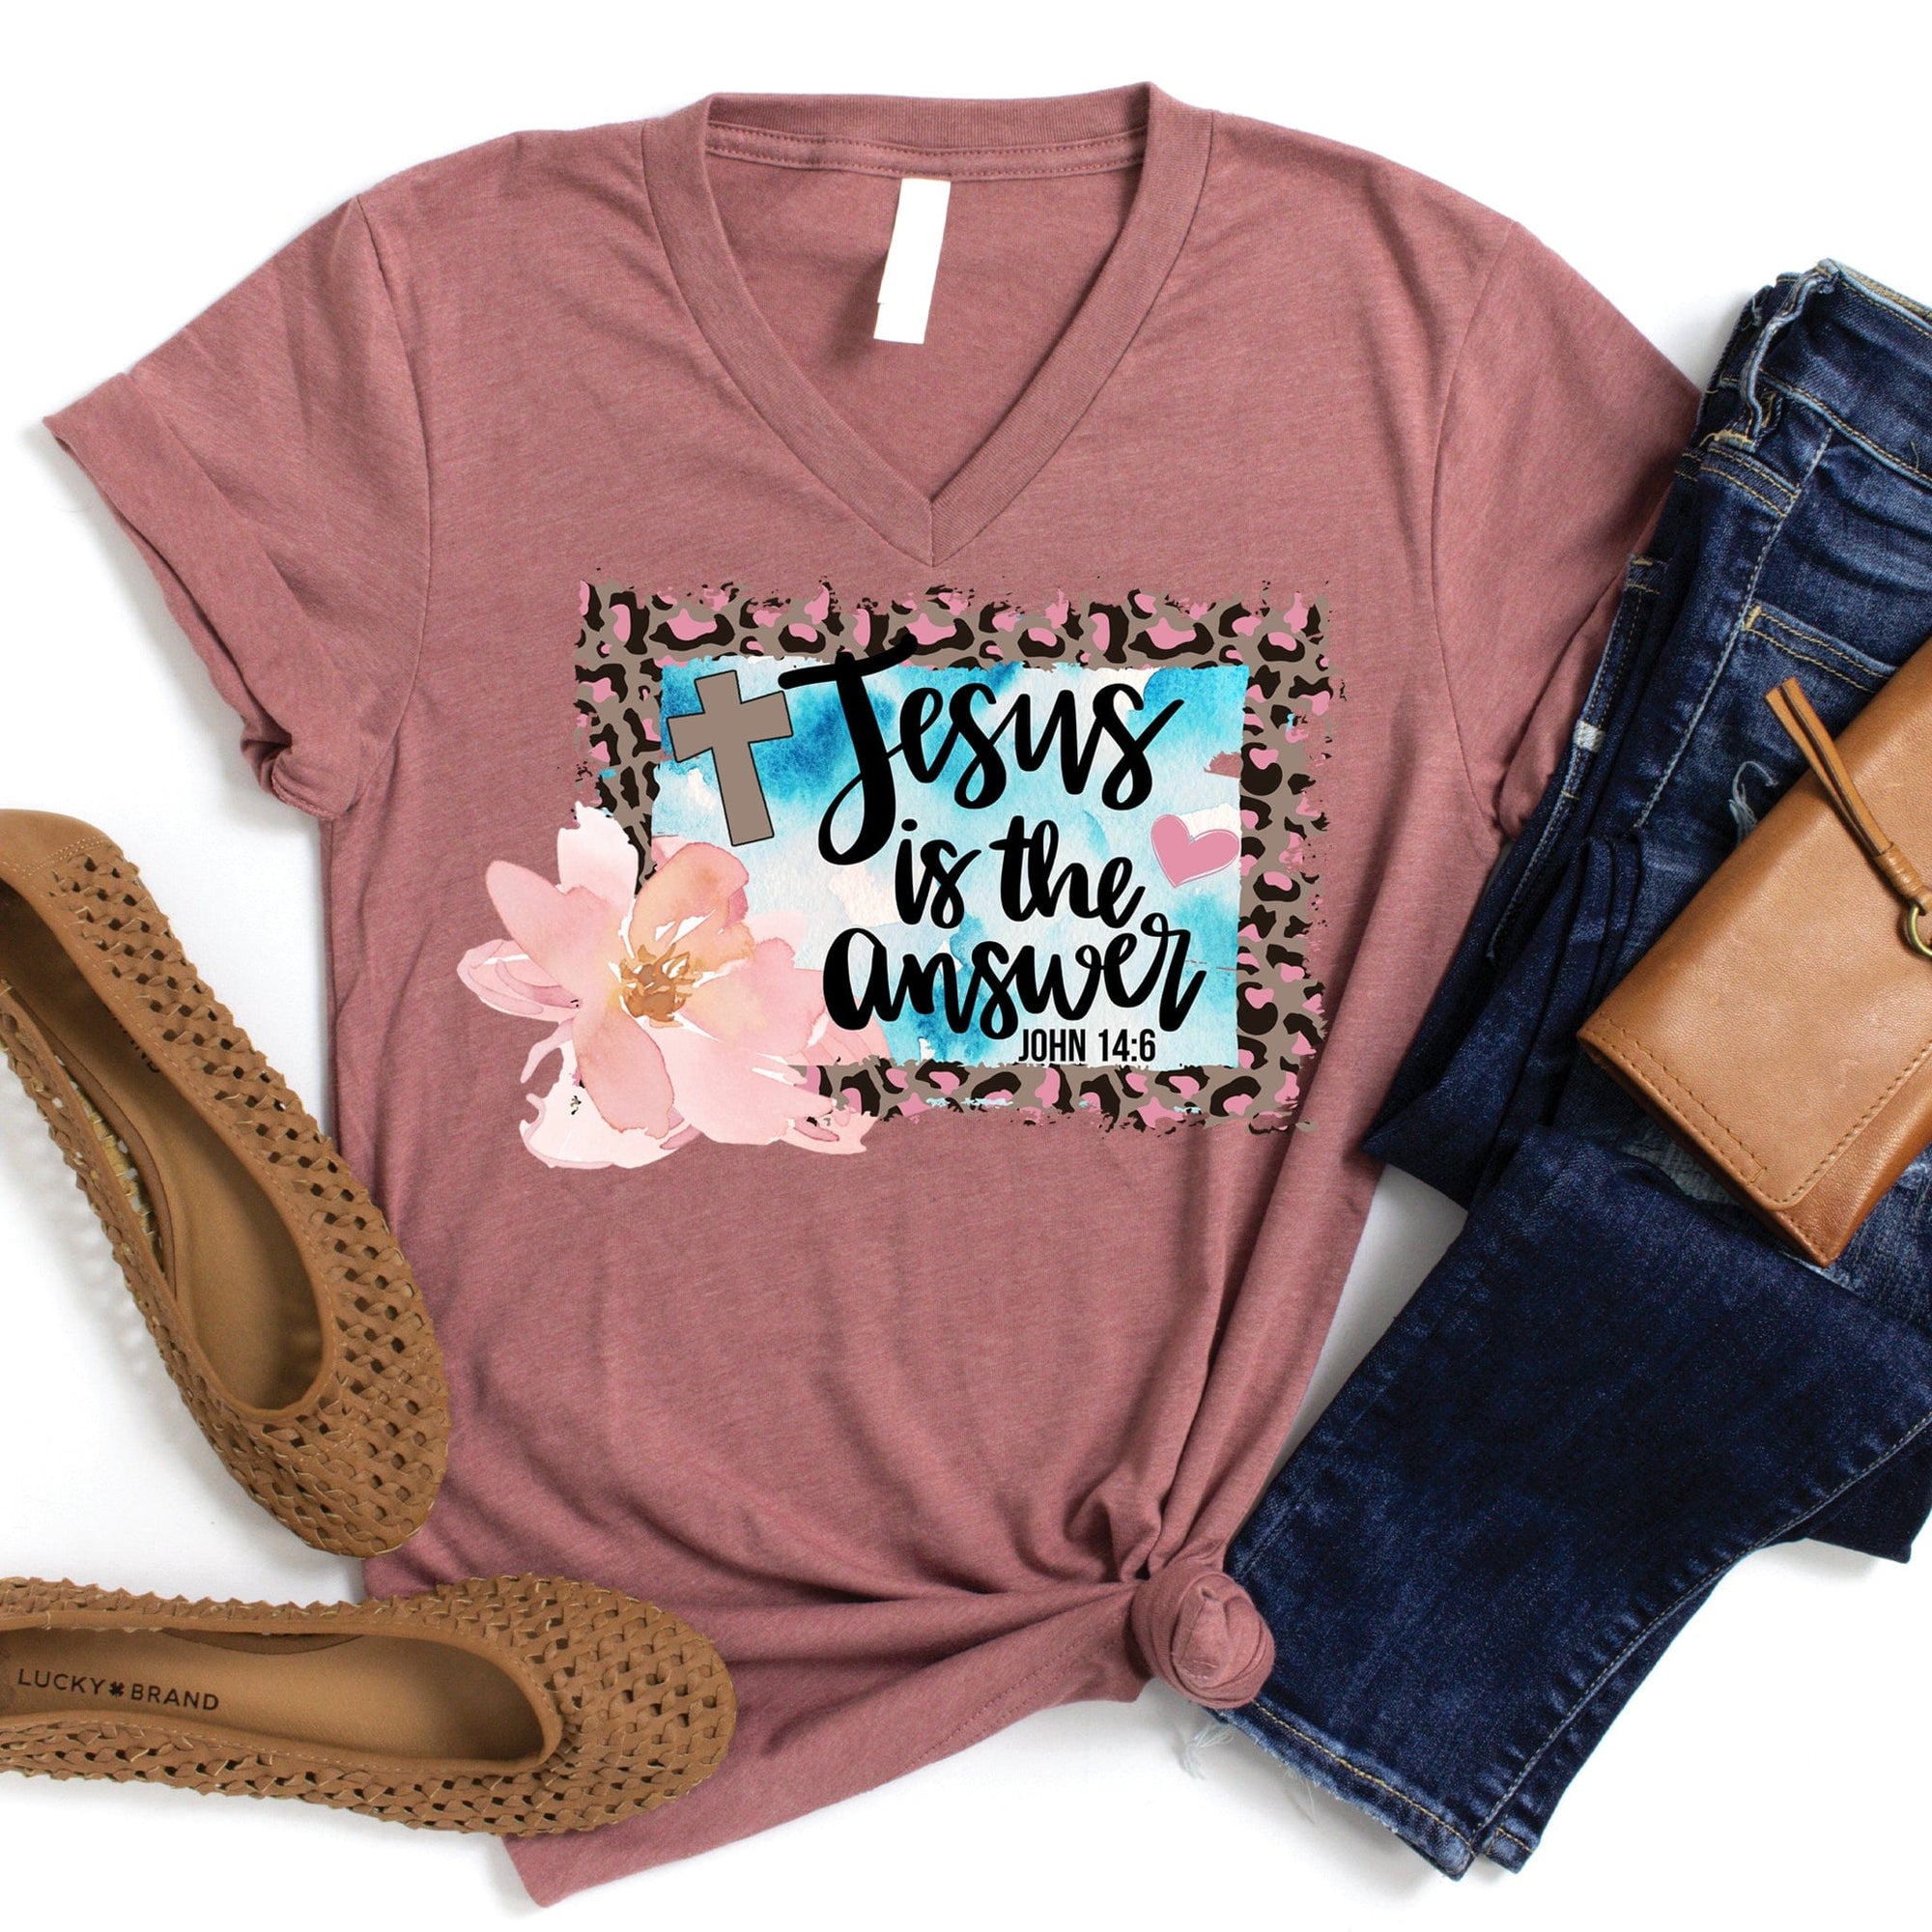 Jesus Is The Answer T Shirts For Women - Women's Christian T Shirts - Women's Religious Shirts